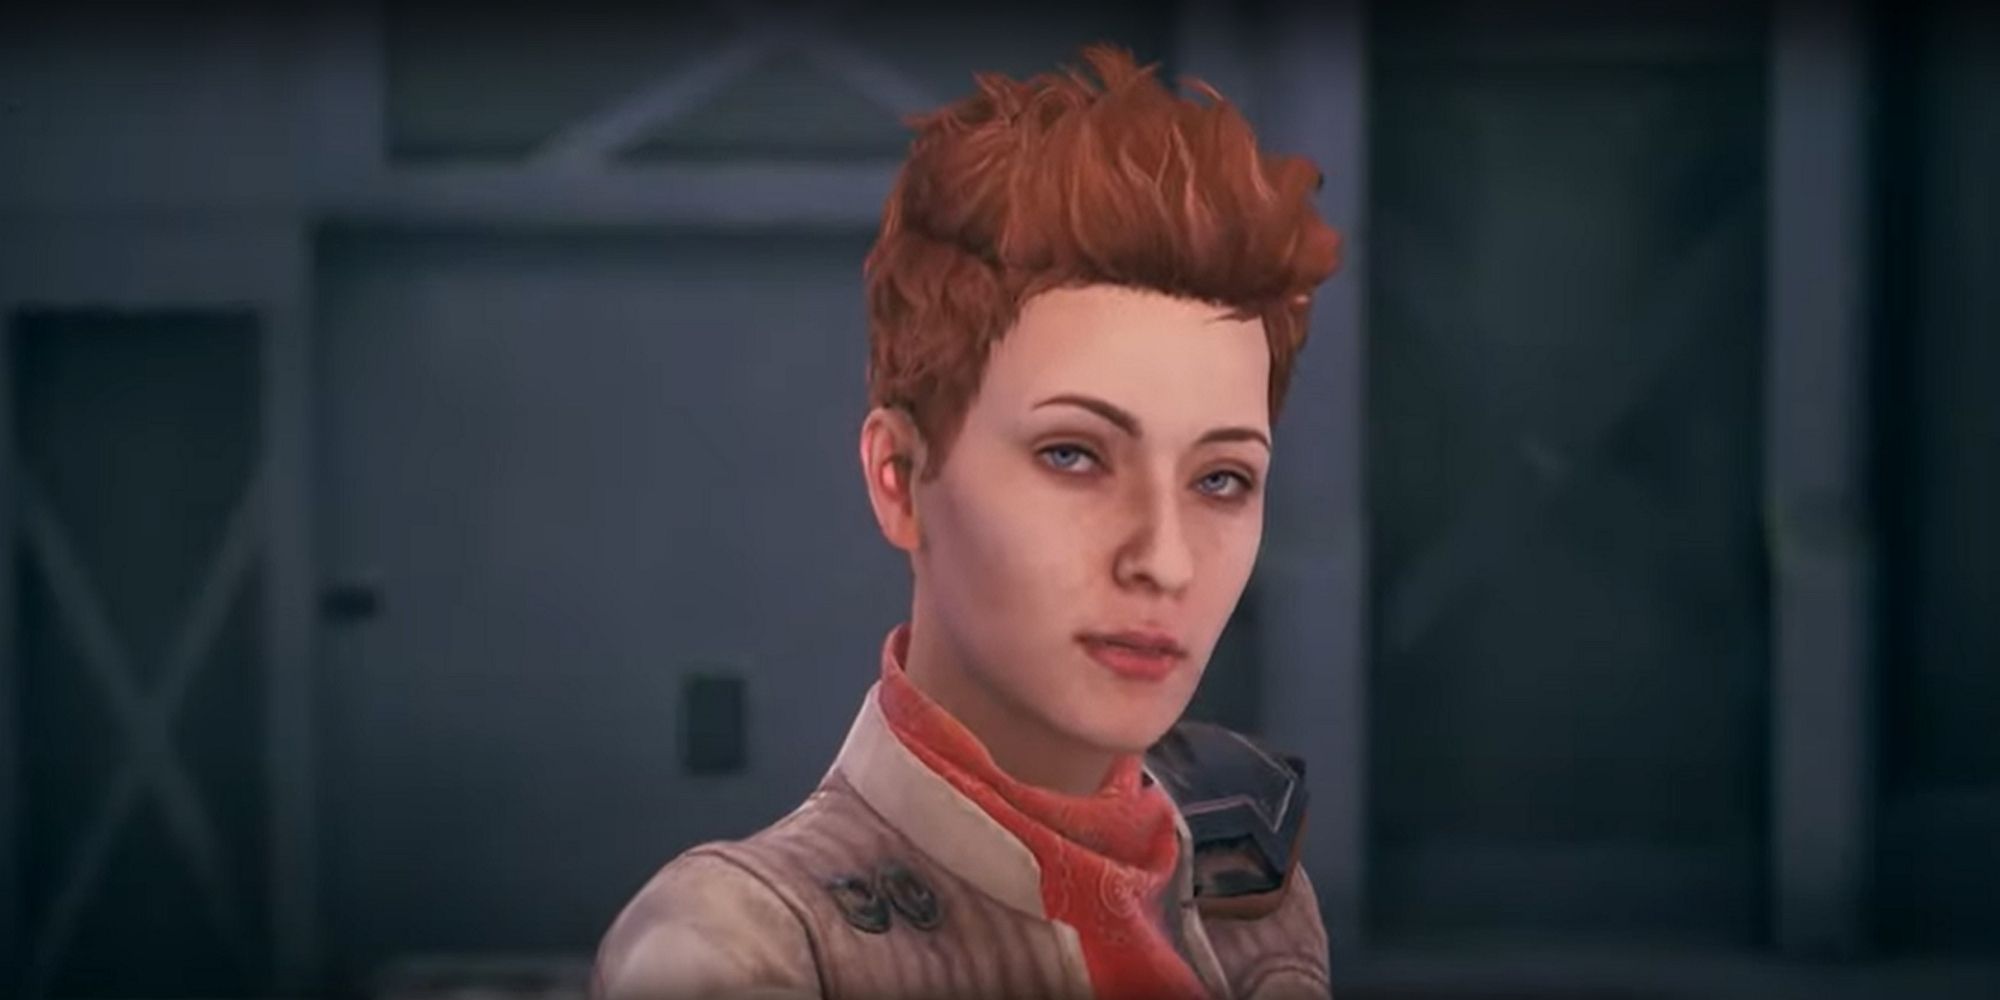 Meeting Ellie in The Outer Worlds